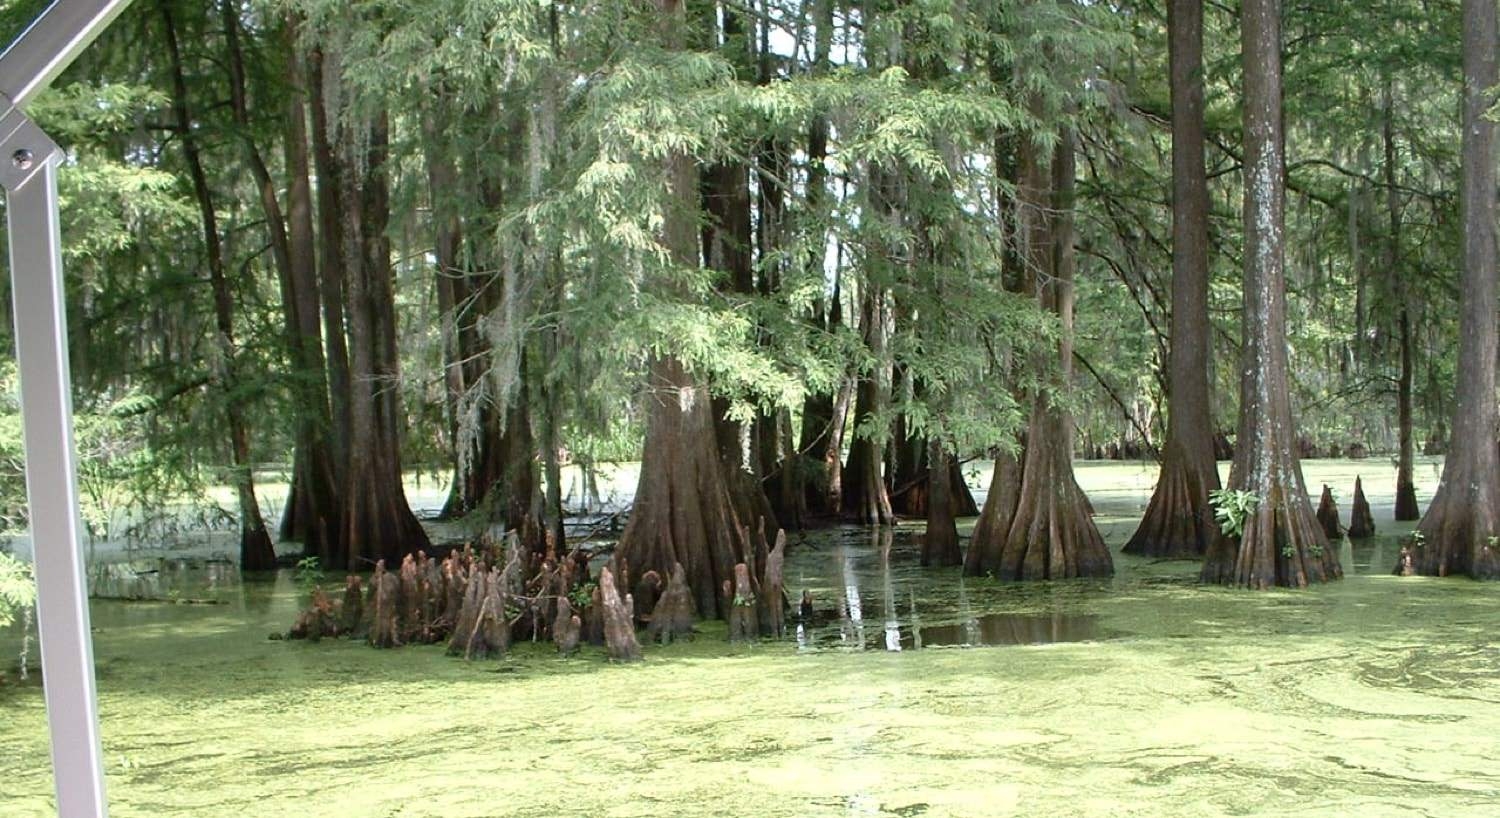 Trees growing out of swampy water covered in algae